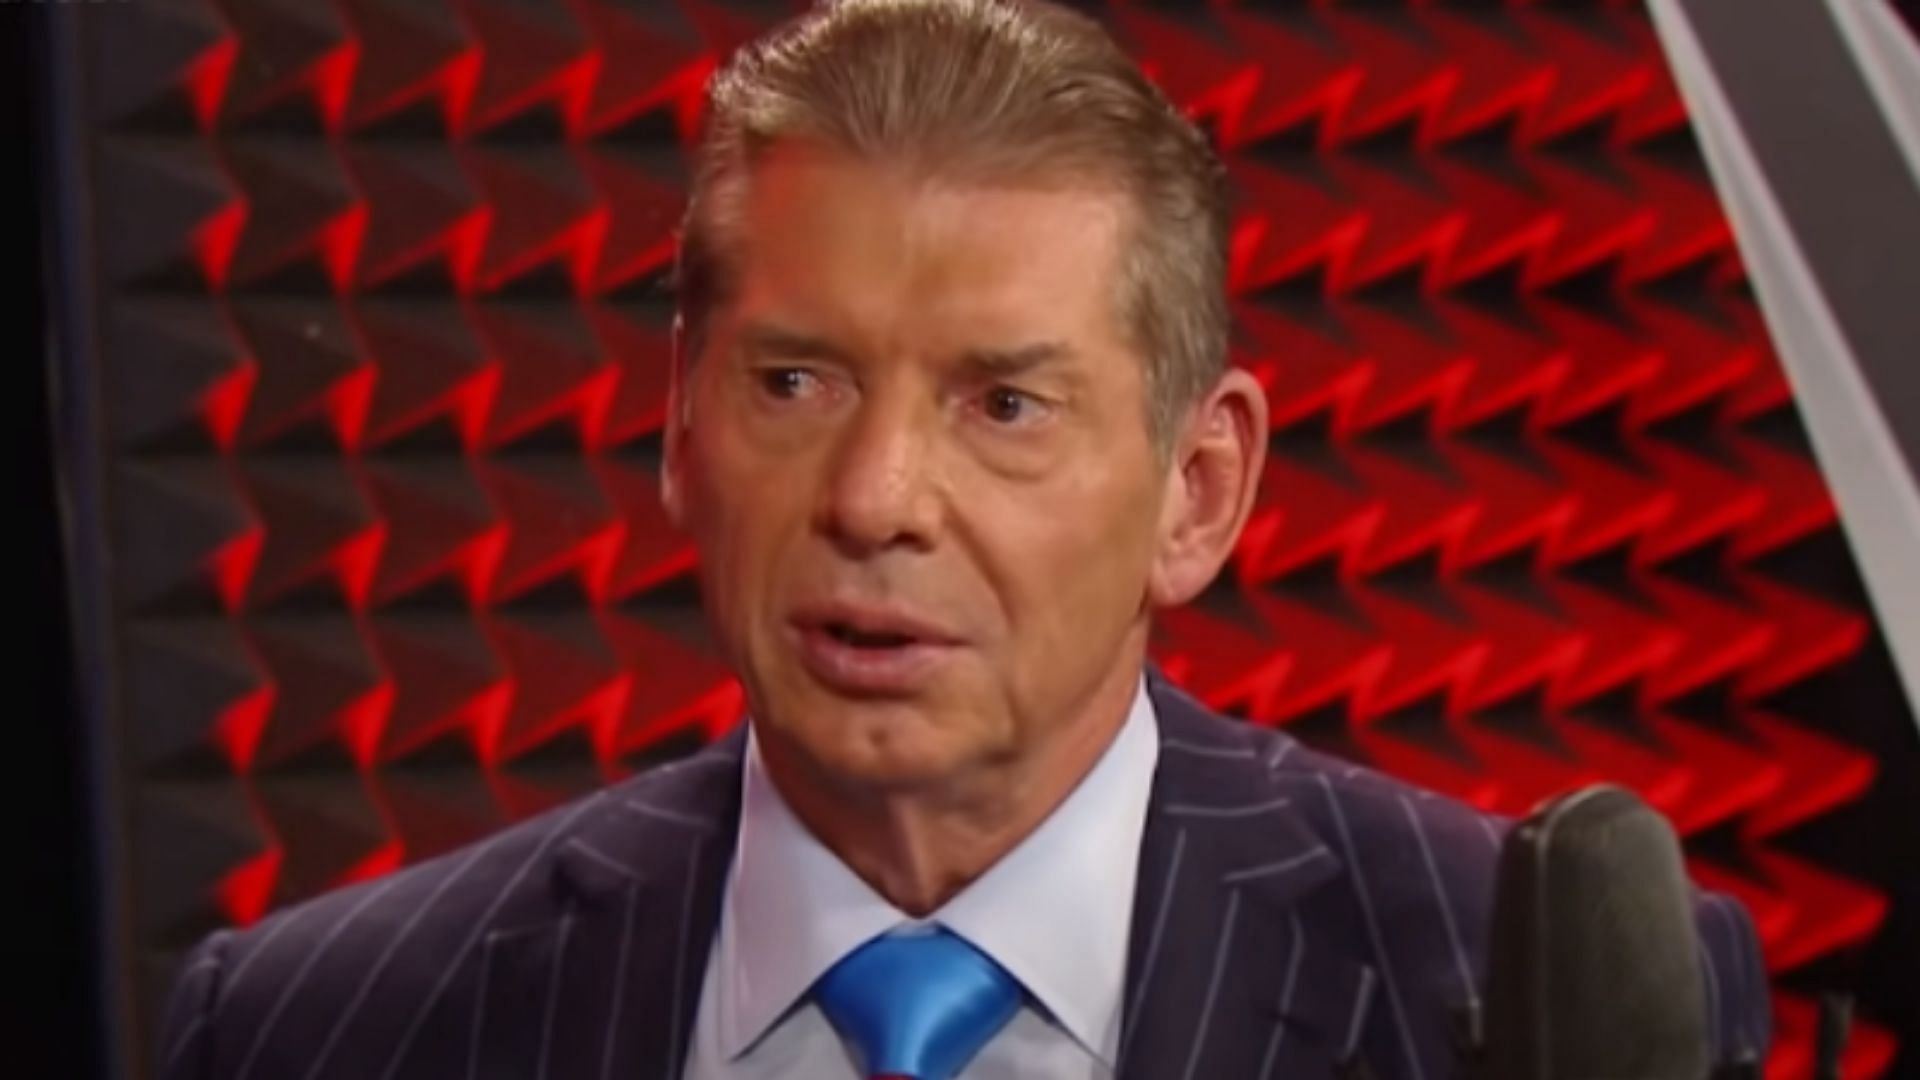 Vince McMahon has the final say on WWE storyline developments.